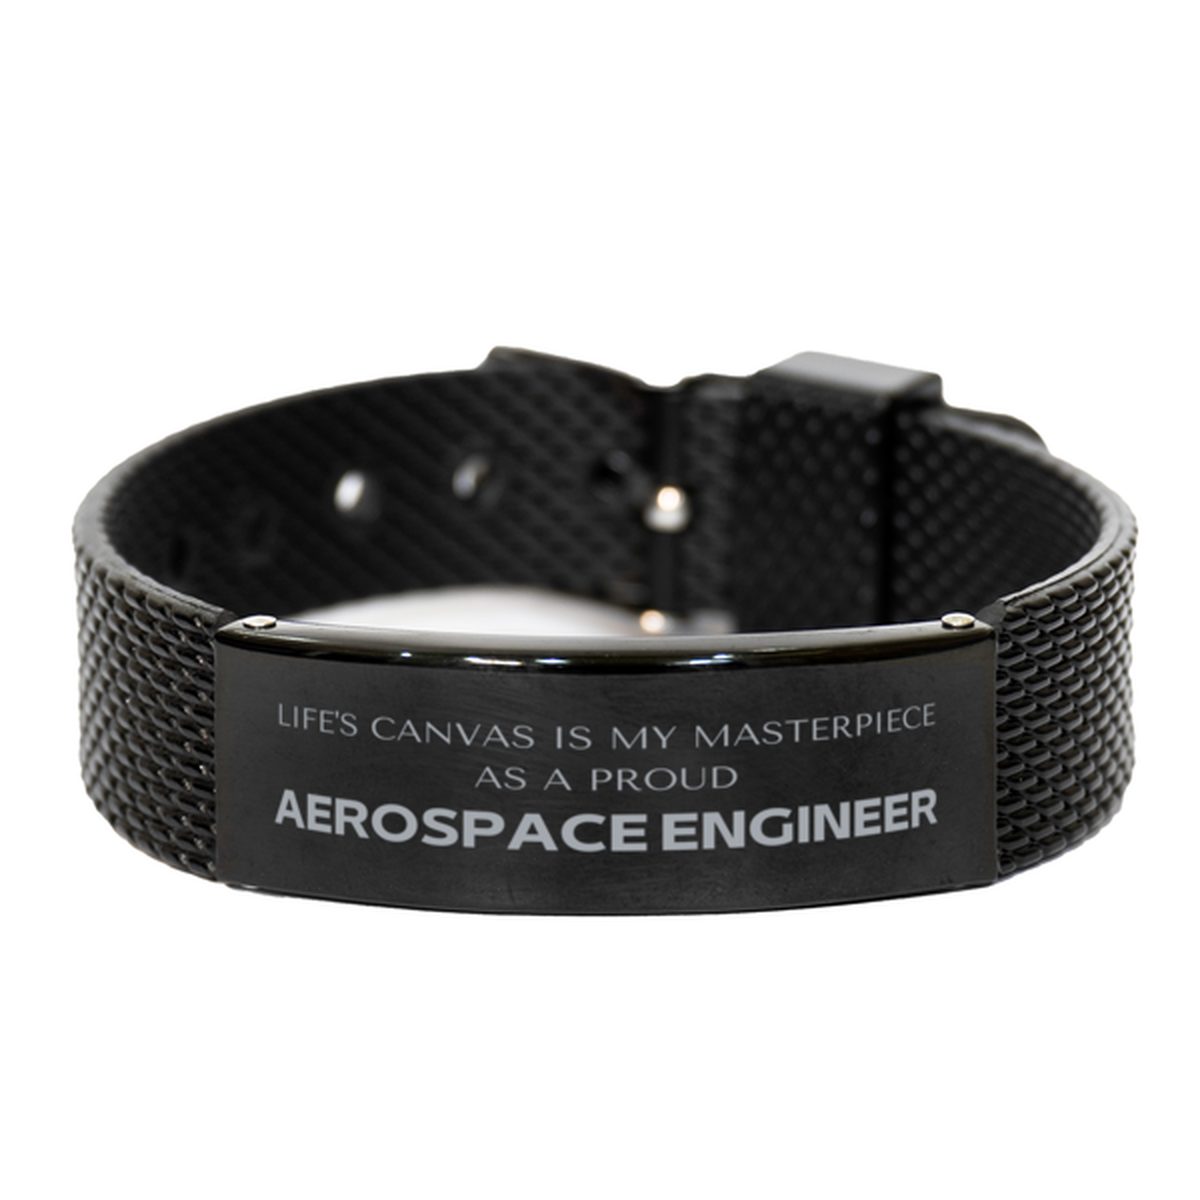 Proud Aerospace Engineer Gifts, Life's canvas is my masterpiece, Epic Birthday Christmas Unique Black Shark Mesh Bracelet For Aerospace Engineer, Coworkers, Men, Women, Friends